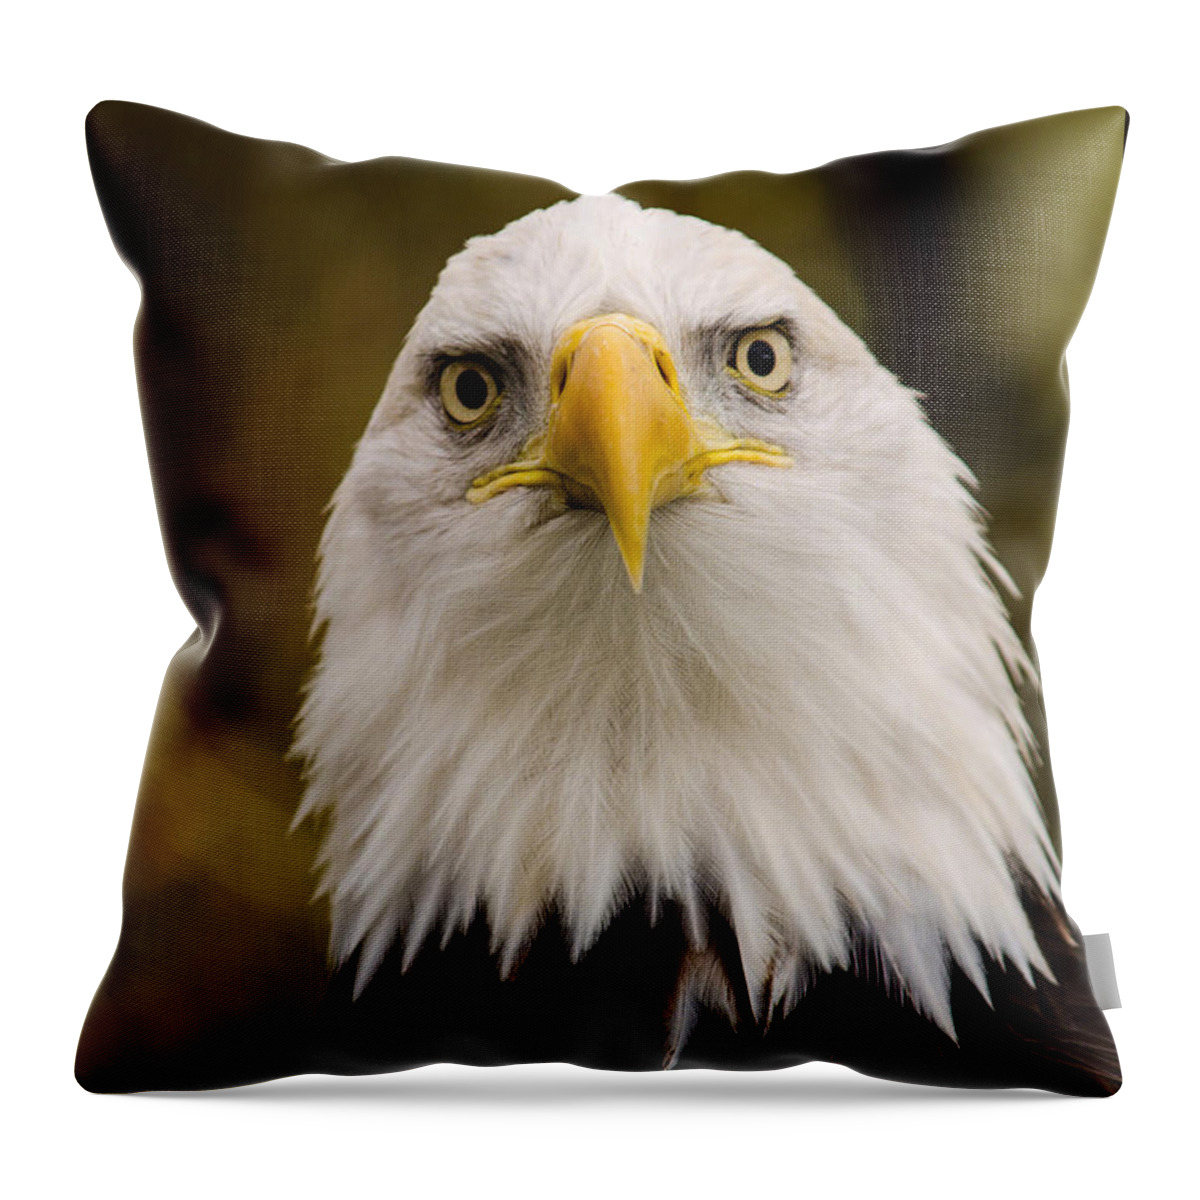 Eagle Throw Pillow featuring the photograph Portrait Of An Eagle by Jordan Blackstone